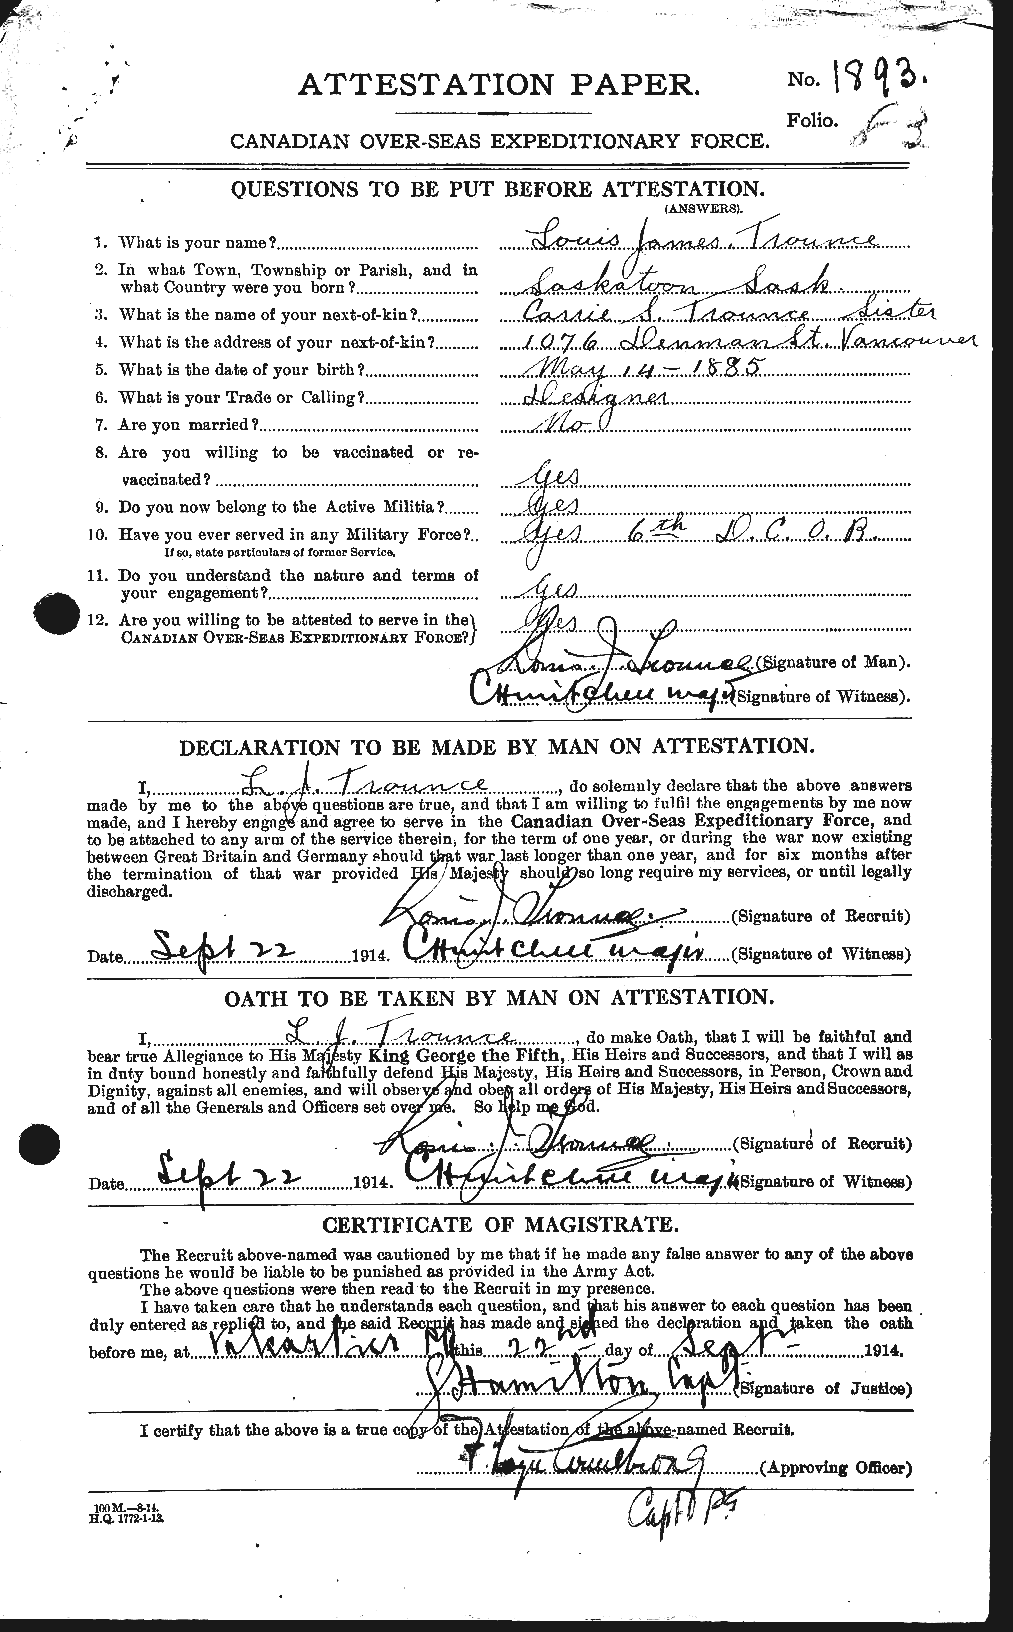 Personnel Records of the First World War - CEF 640453a